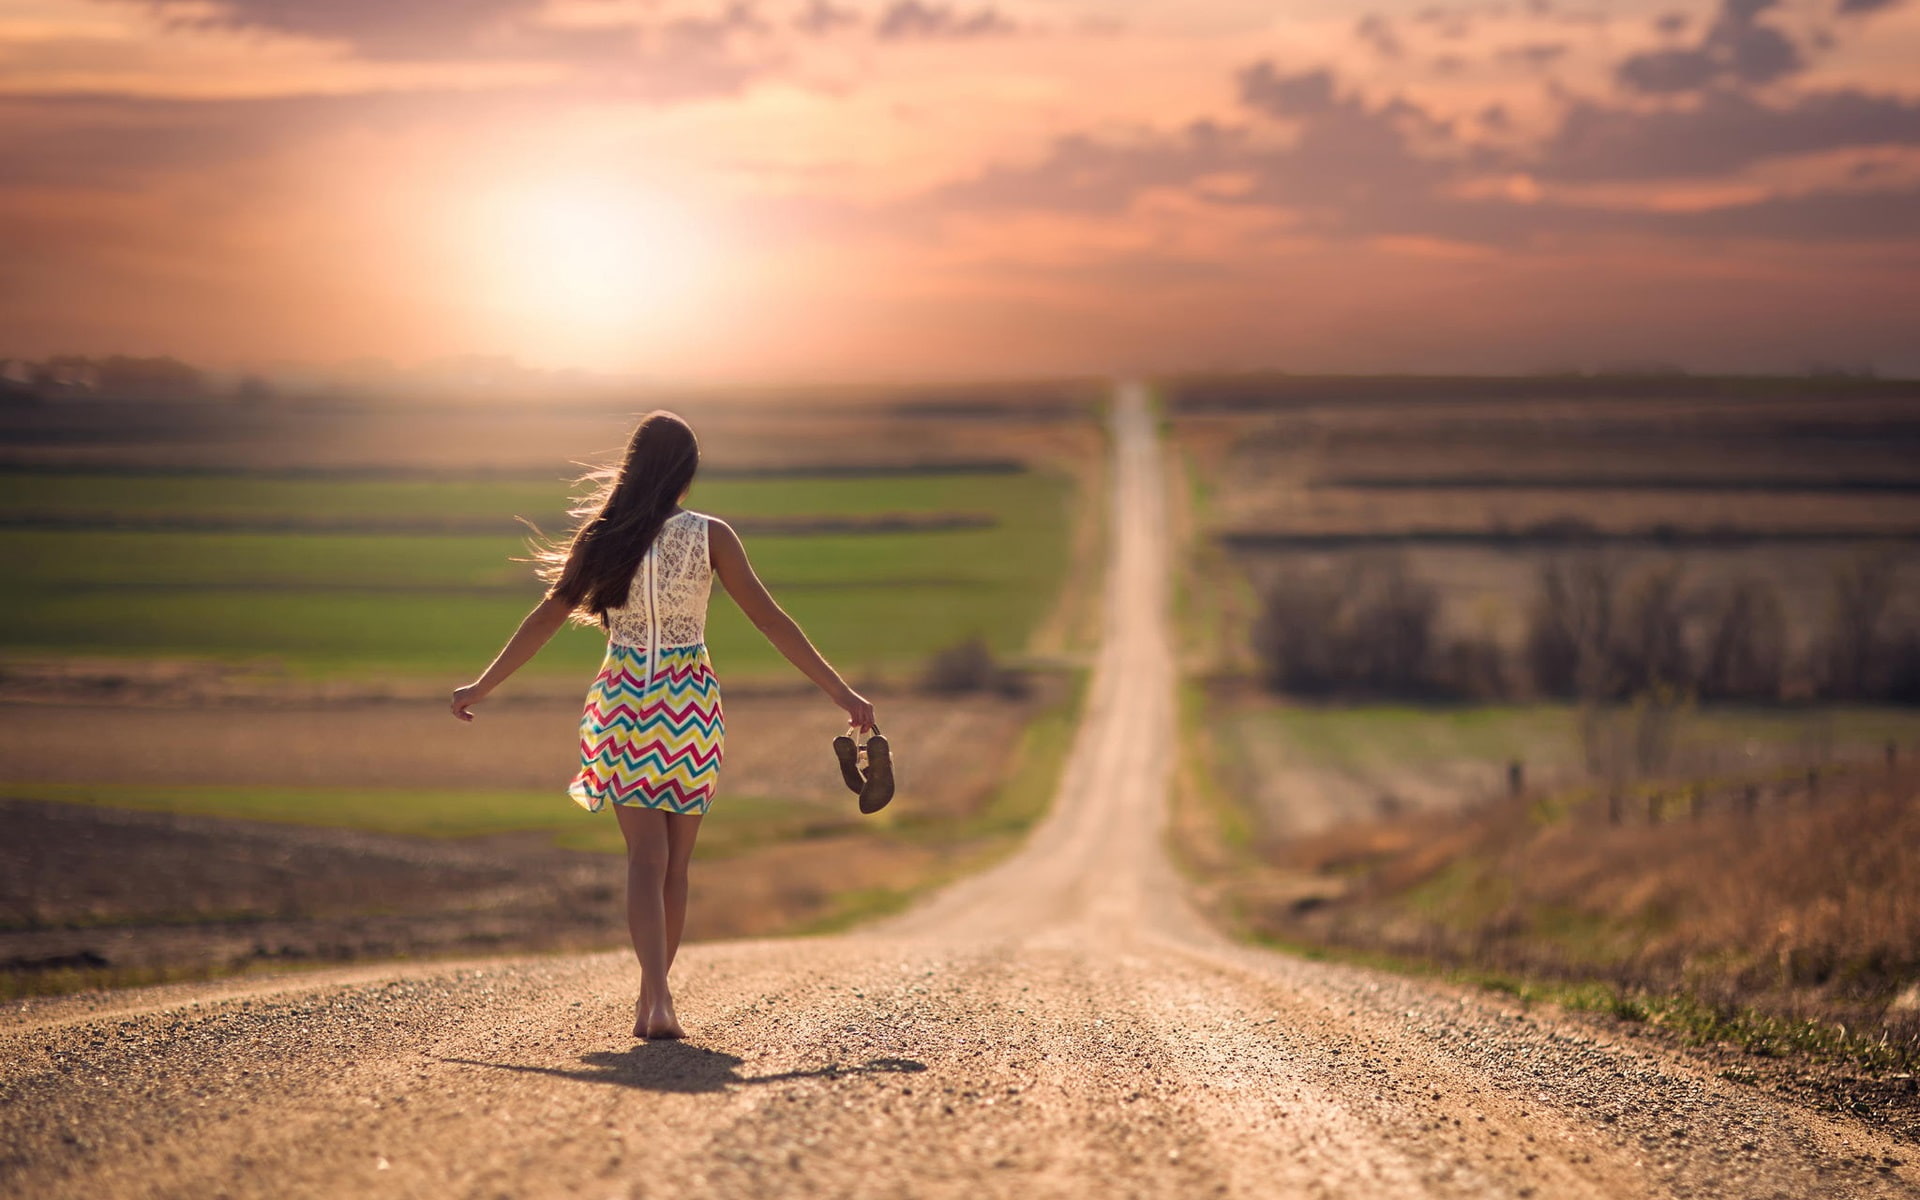 Girl walking in the road, sunset